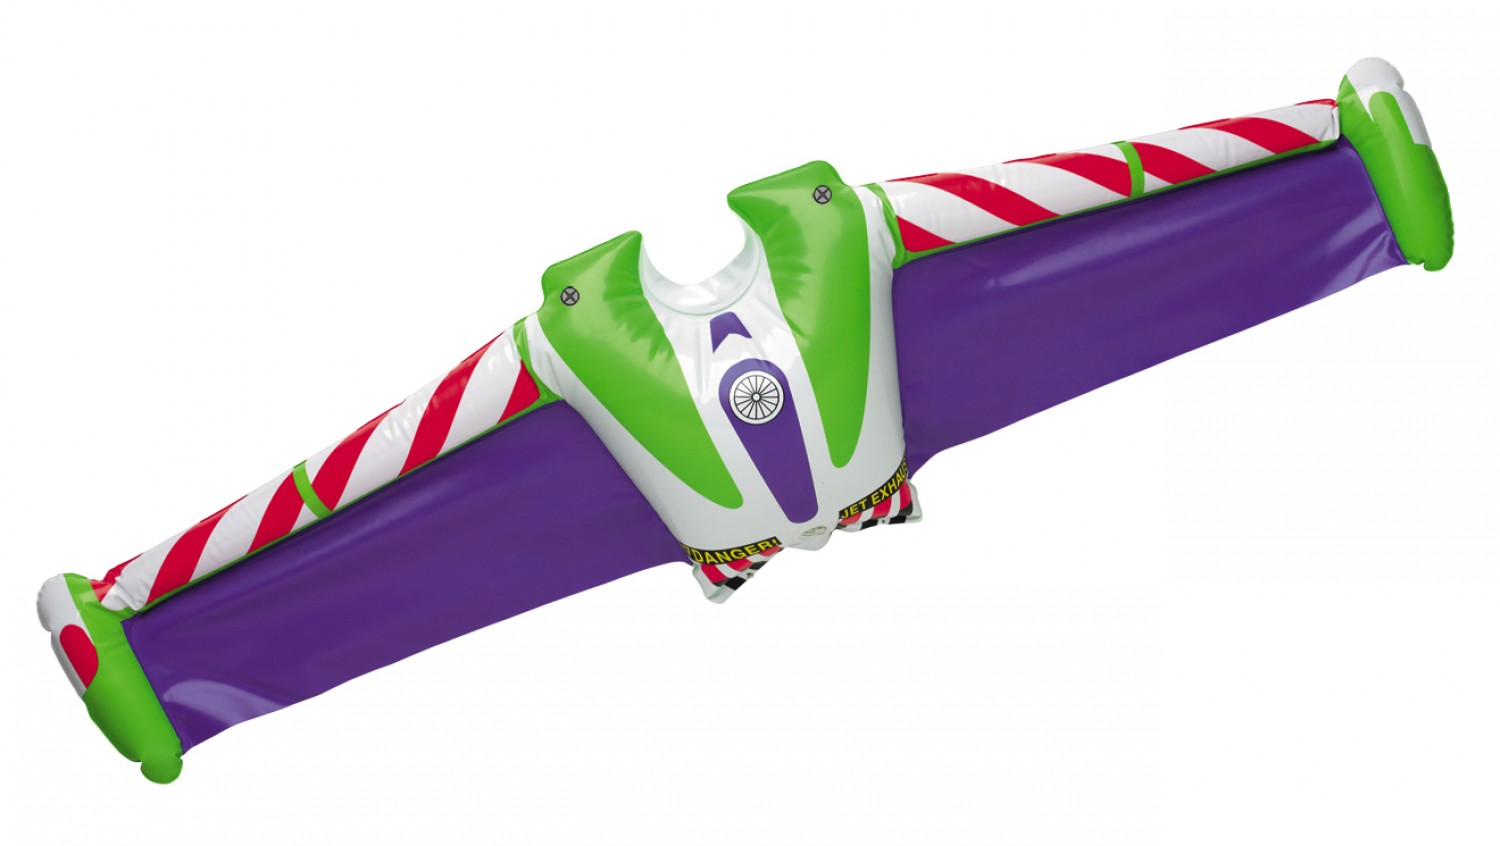 Buzz Lightyear Jet Pack includes inflatable vinyl purple wings with green. 